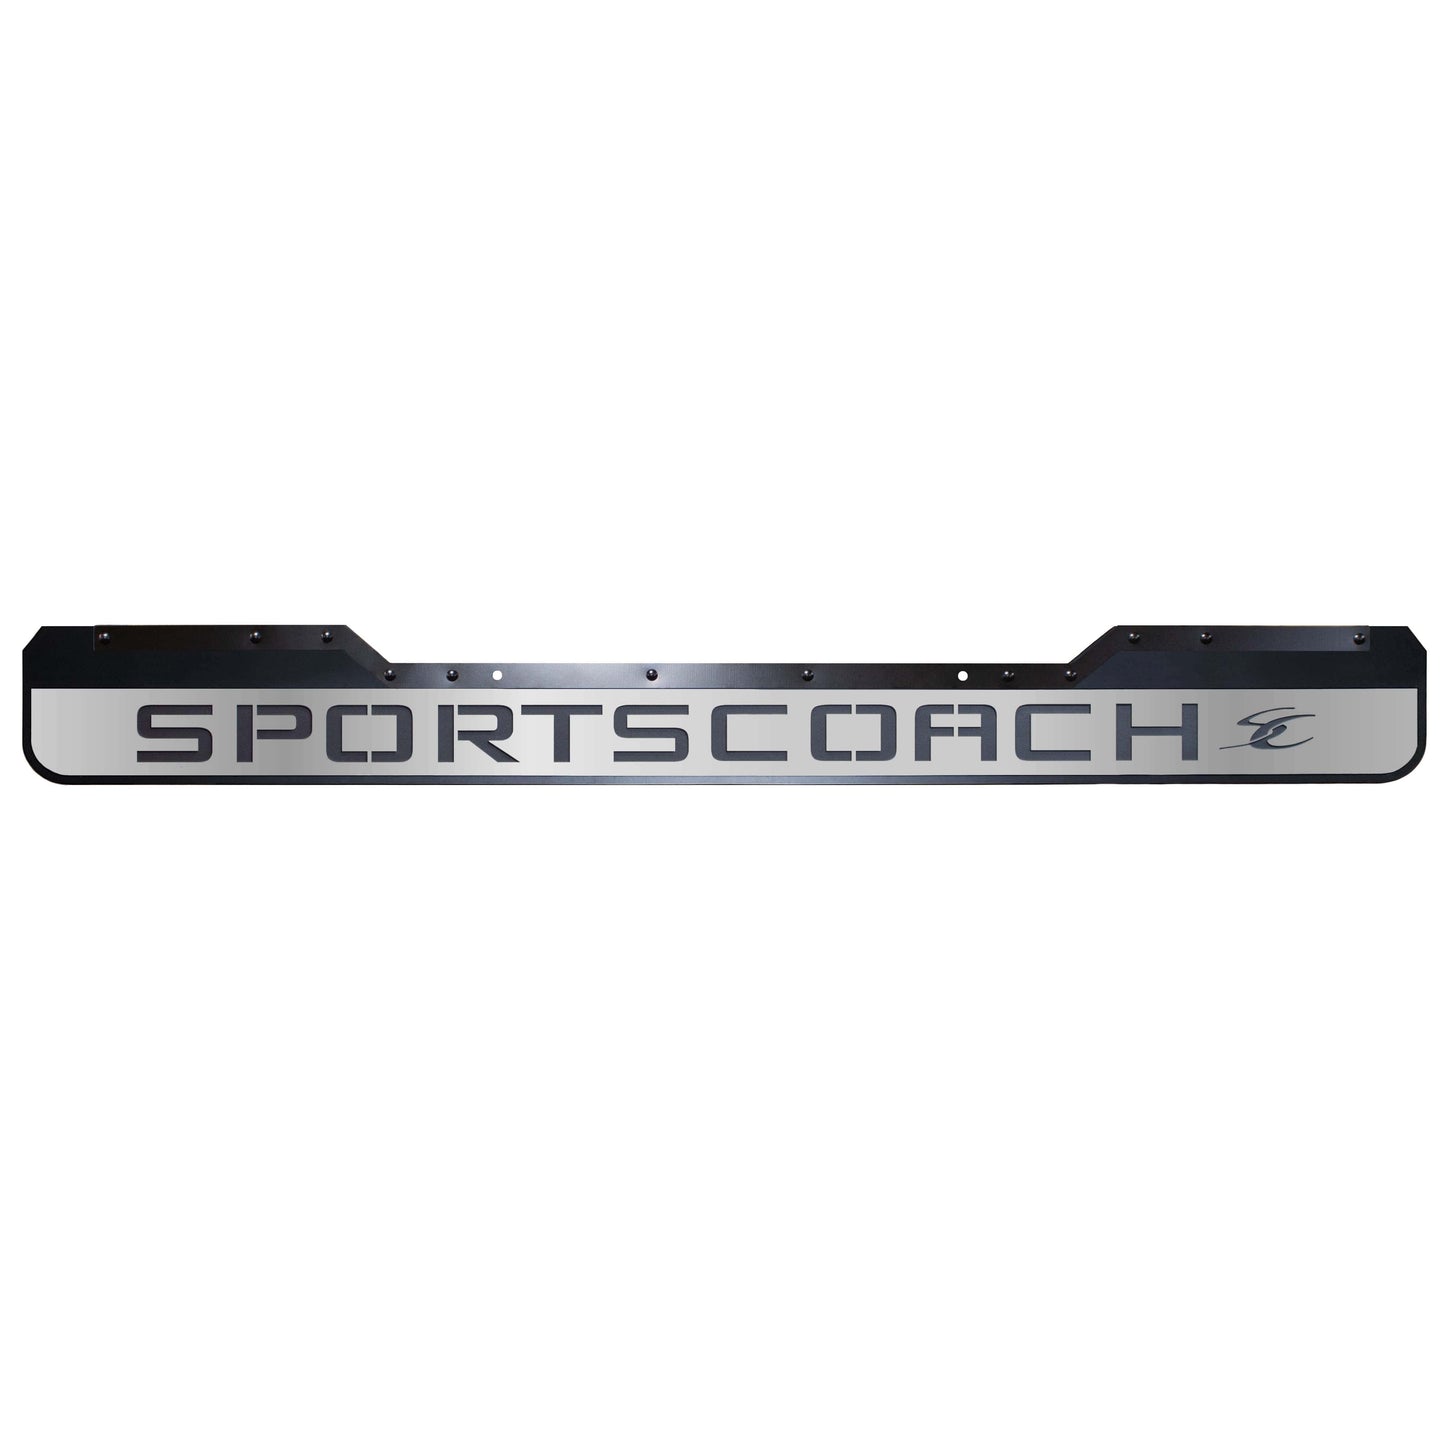 Future-Sales-Rock-Guard-SPORTSCOACH-11-Notched-Sportscoach-MFR-SC-11N-11-by-95-Center-Notch-Mirror-Finish-Face-Plate-replacement